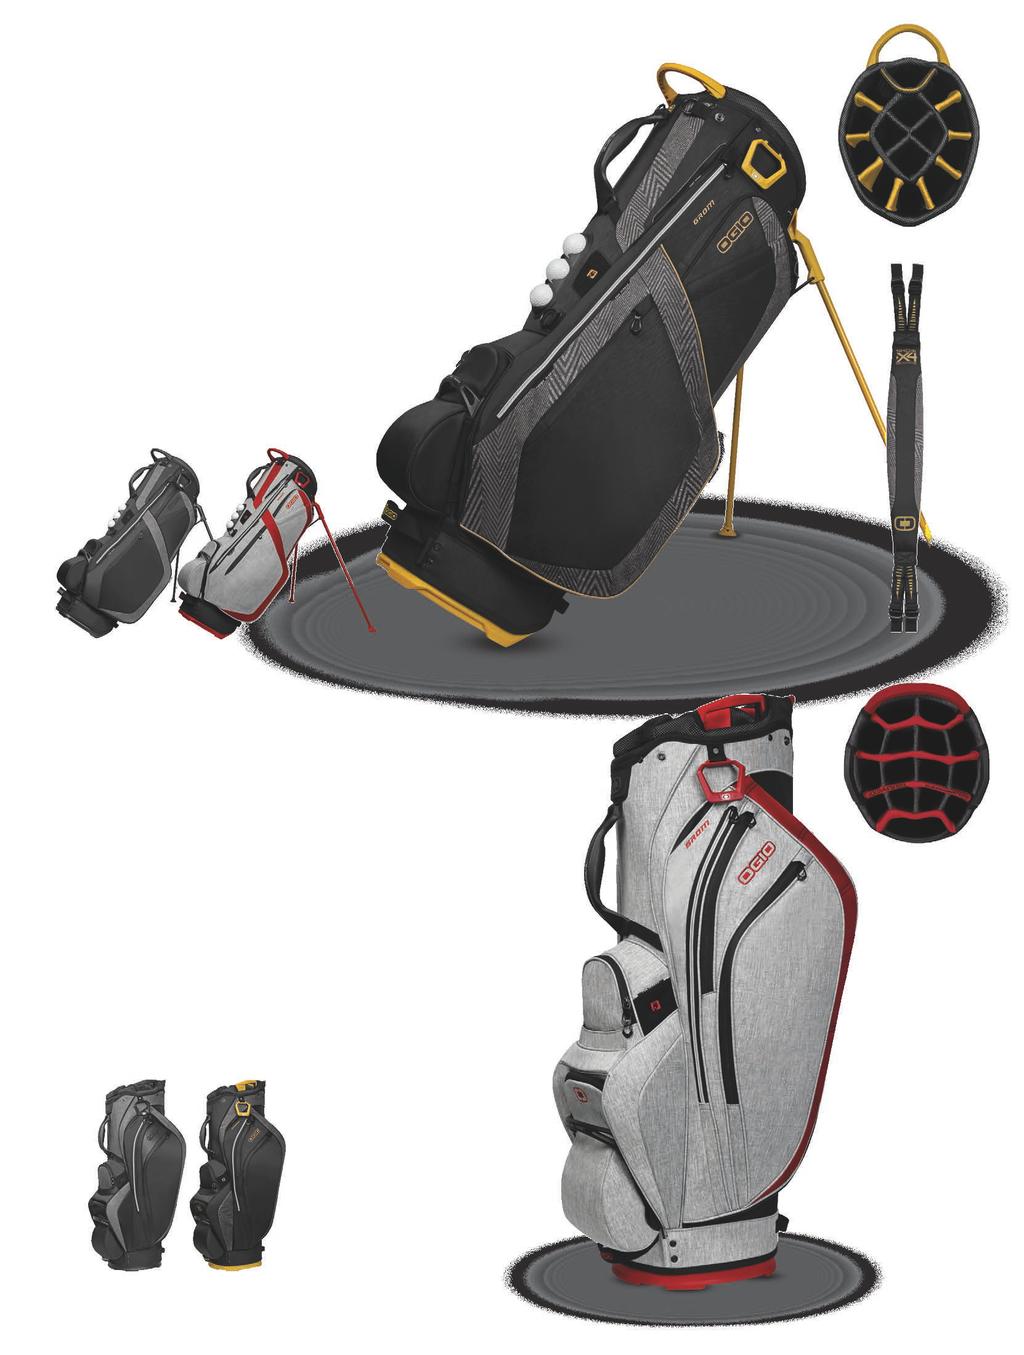 GROM ST YLE:125062 [STAND] OGIO s best selling stand bag for the golfer that wants a hybrid bag that can be used as either a carry or cart riding bag.